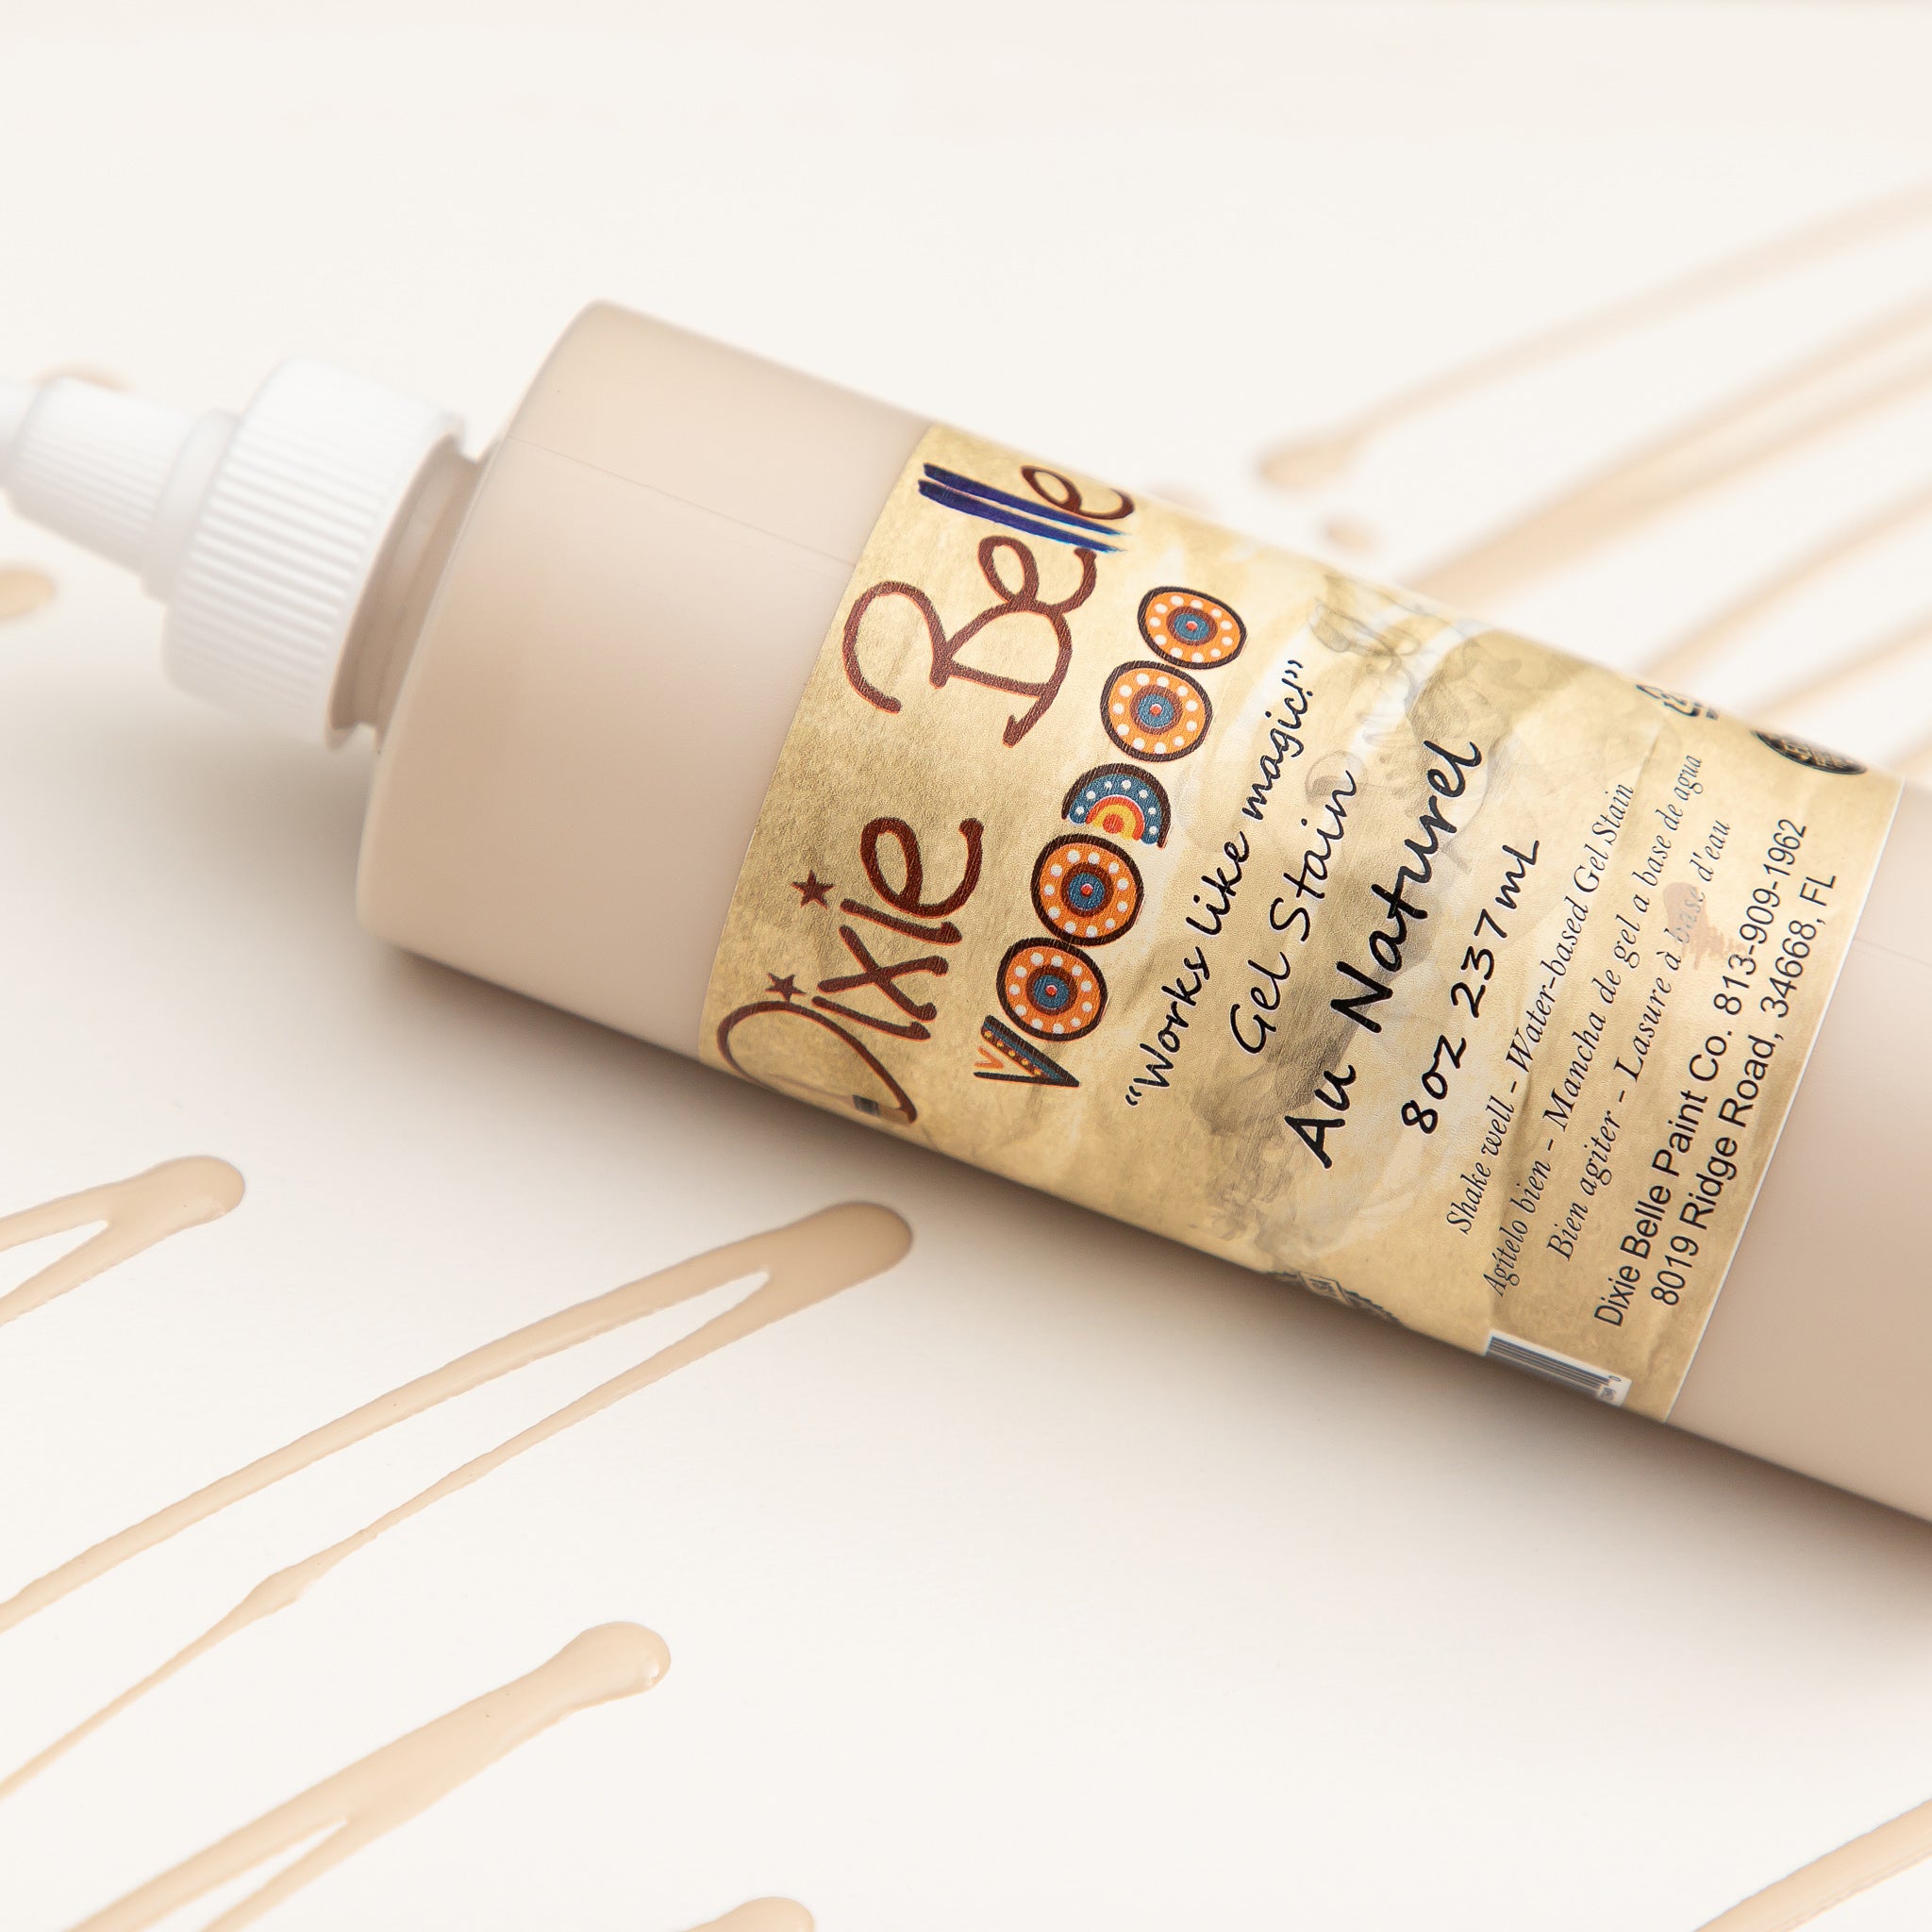 Dixie Belle's Au Naturel Voodoo Gel Stain is against a white background with a poured color sample.